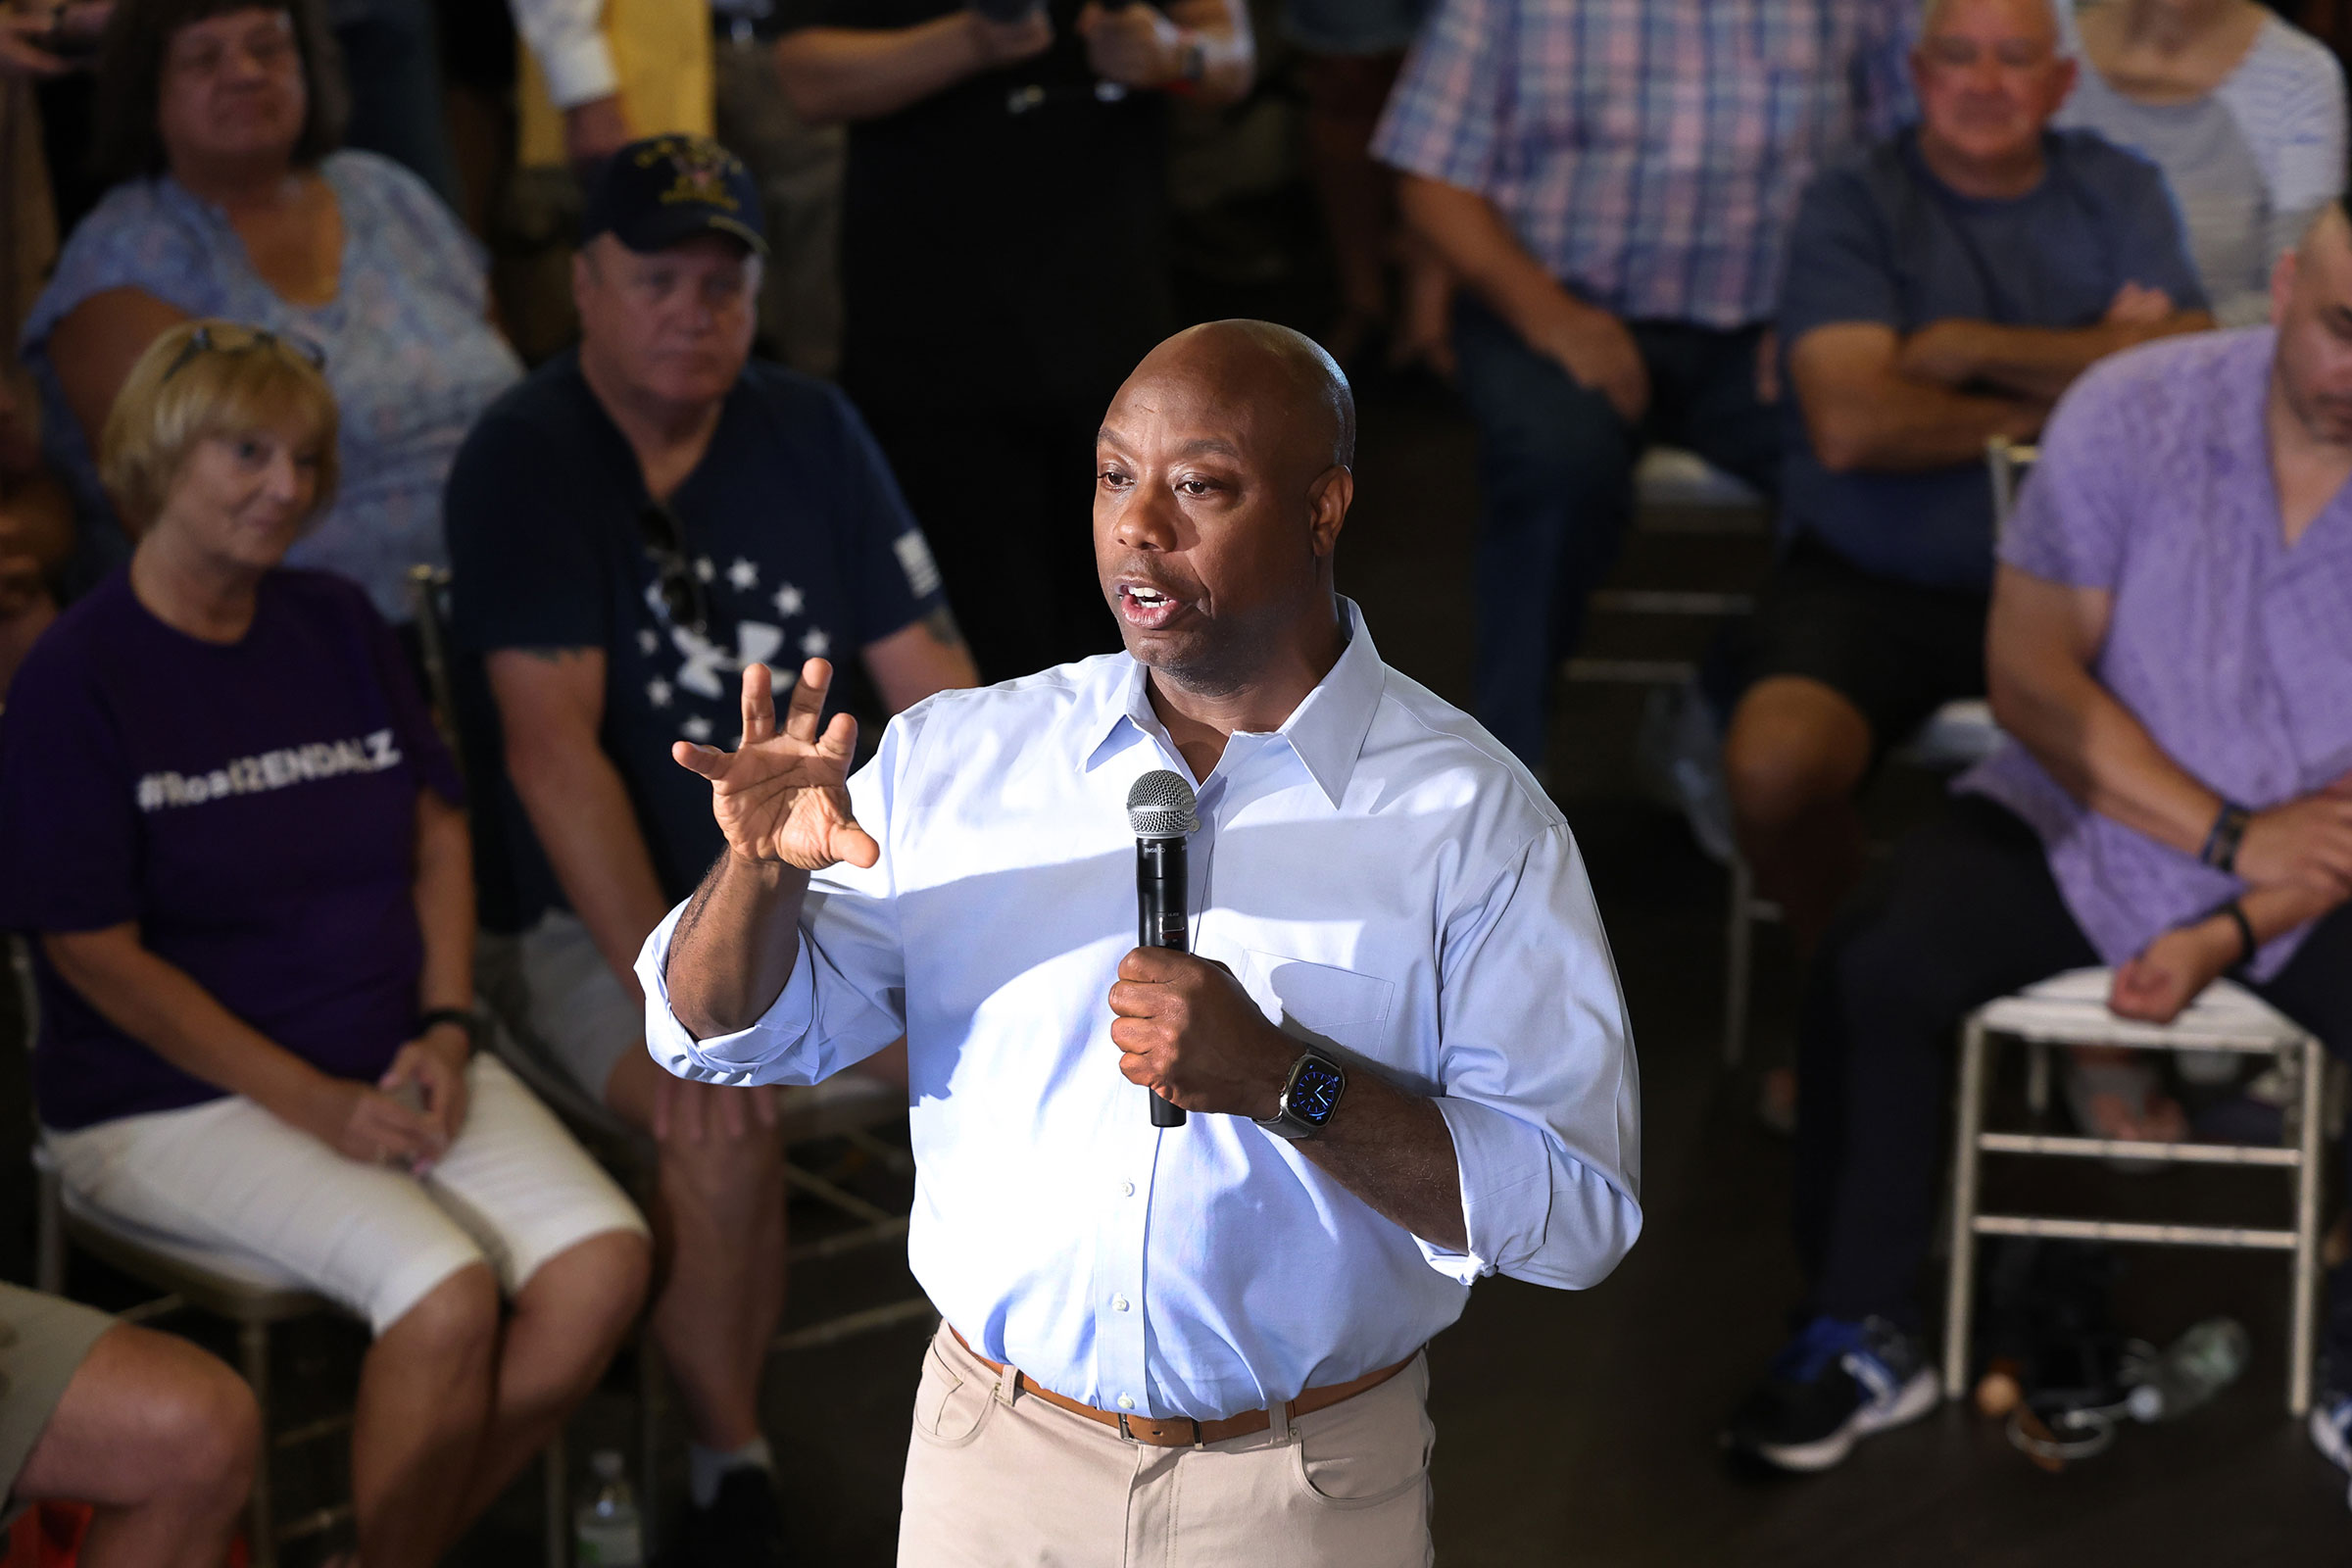 Senator Tim Scott stands in the middle of a group of supporters who are seated as he speaks into a microphone and gestures with his hands